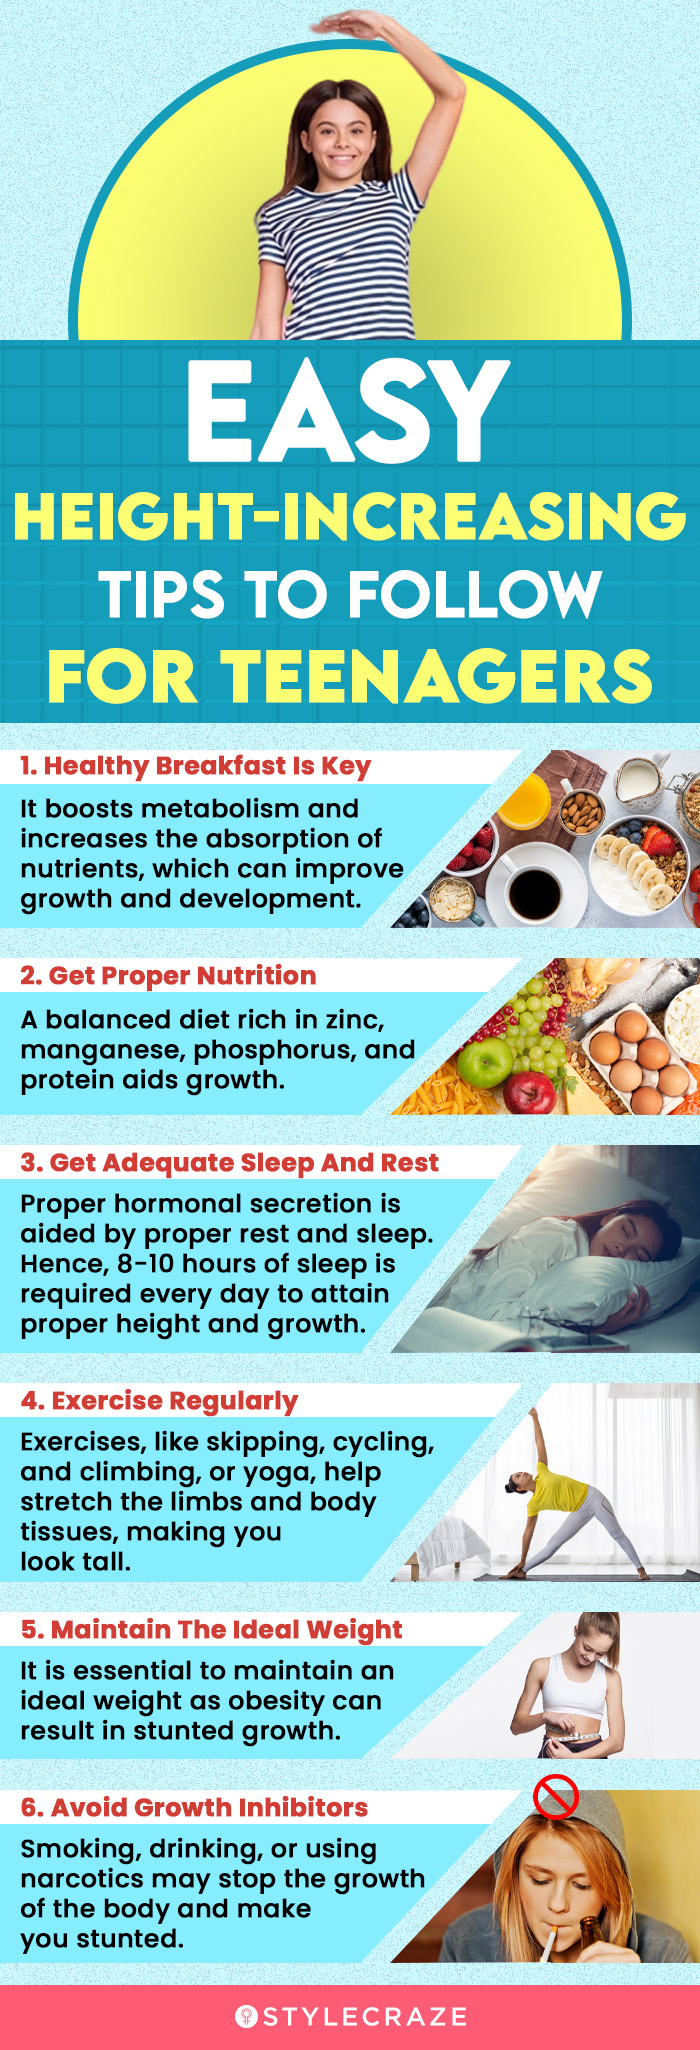 easy height|increasing tips to follow for teenagers [infographic]